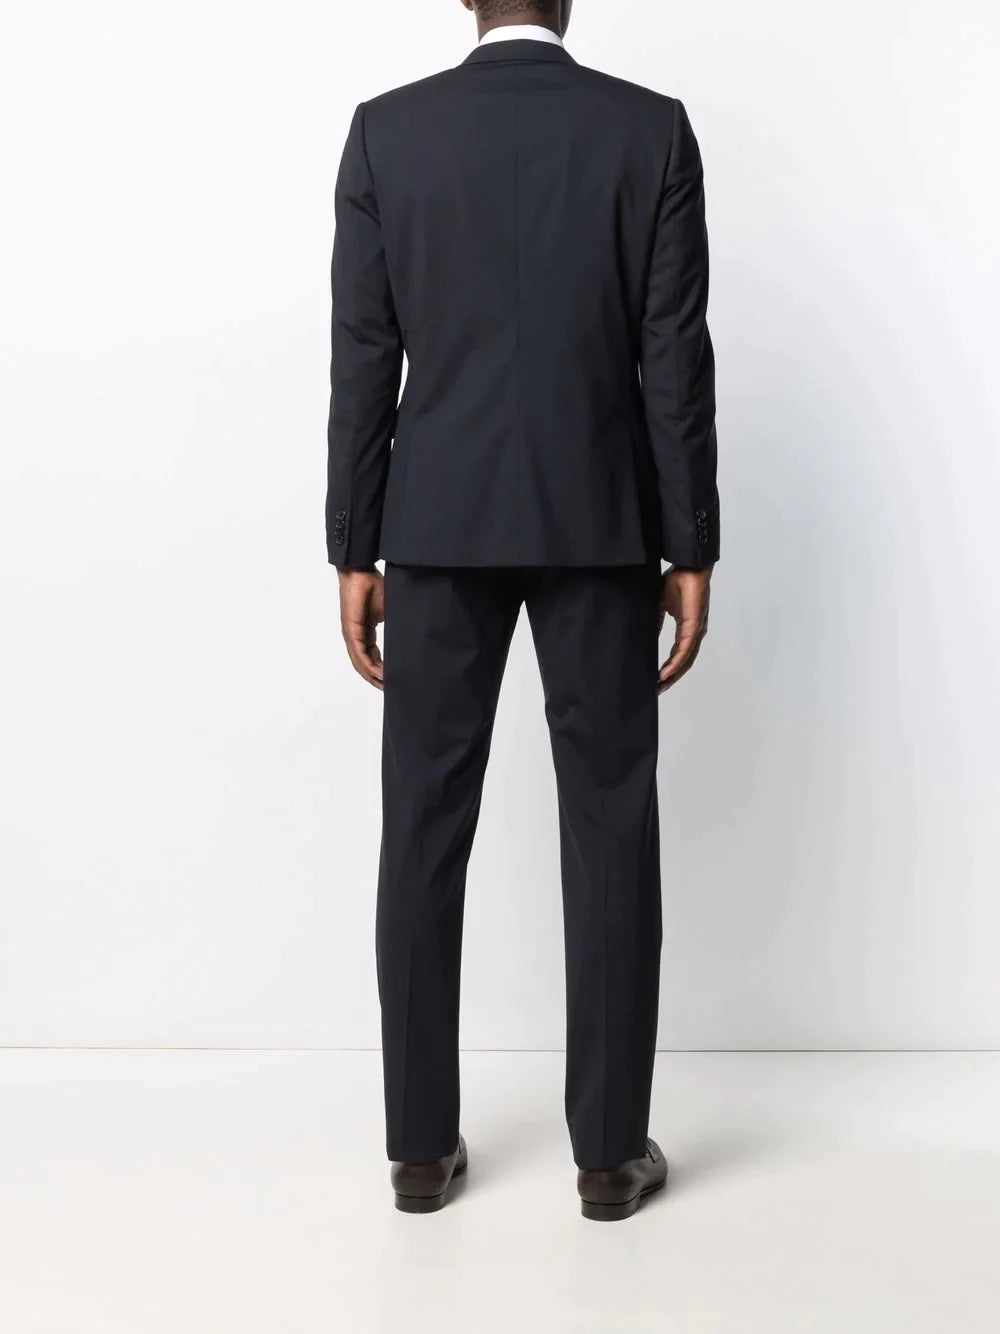 Paul Smith Tailored Fit 2 Button Suit Navy 3